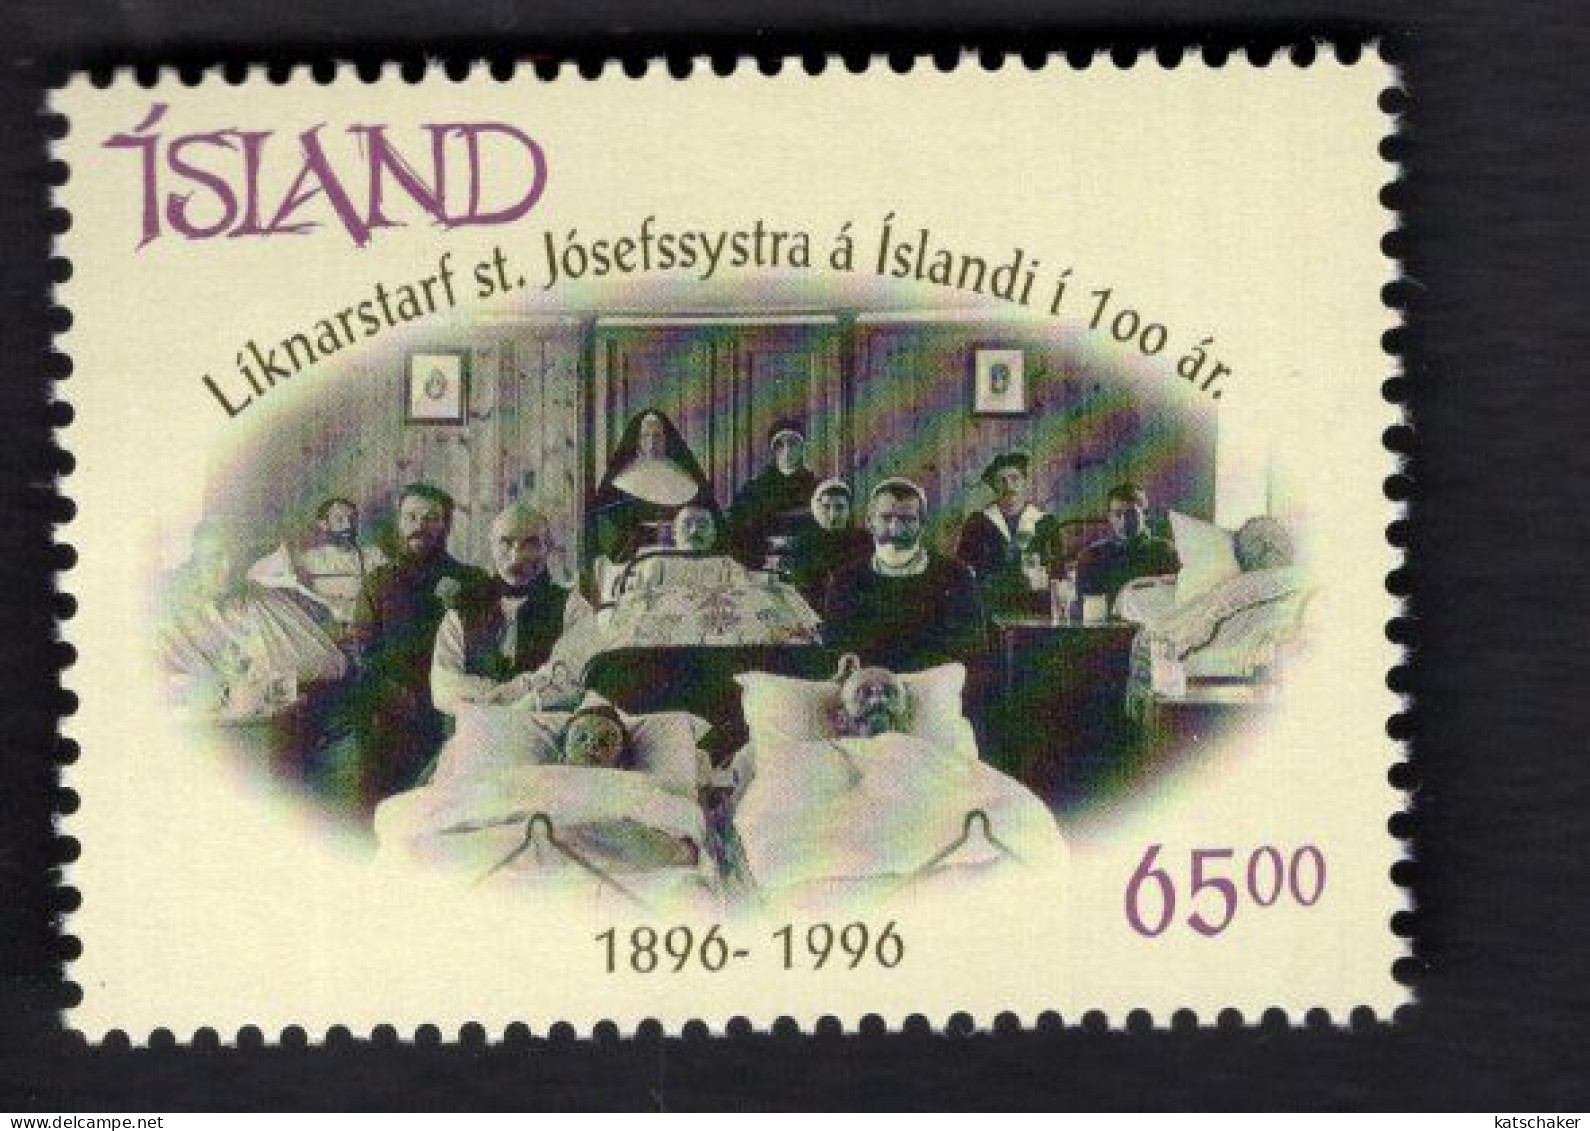 2022465560 1996 SCOTT 828 (XX)  POSTFRIS MINT NEVER HINGED - ORDER OF THE SISTERS OF ST. JOSEPH IN ICELAND - CENT. - Ungebraucht